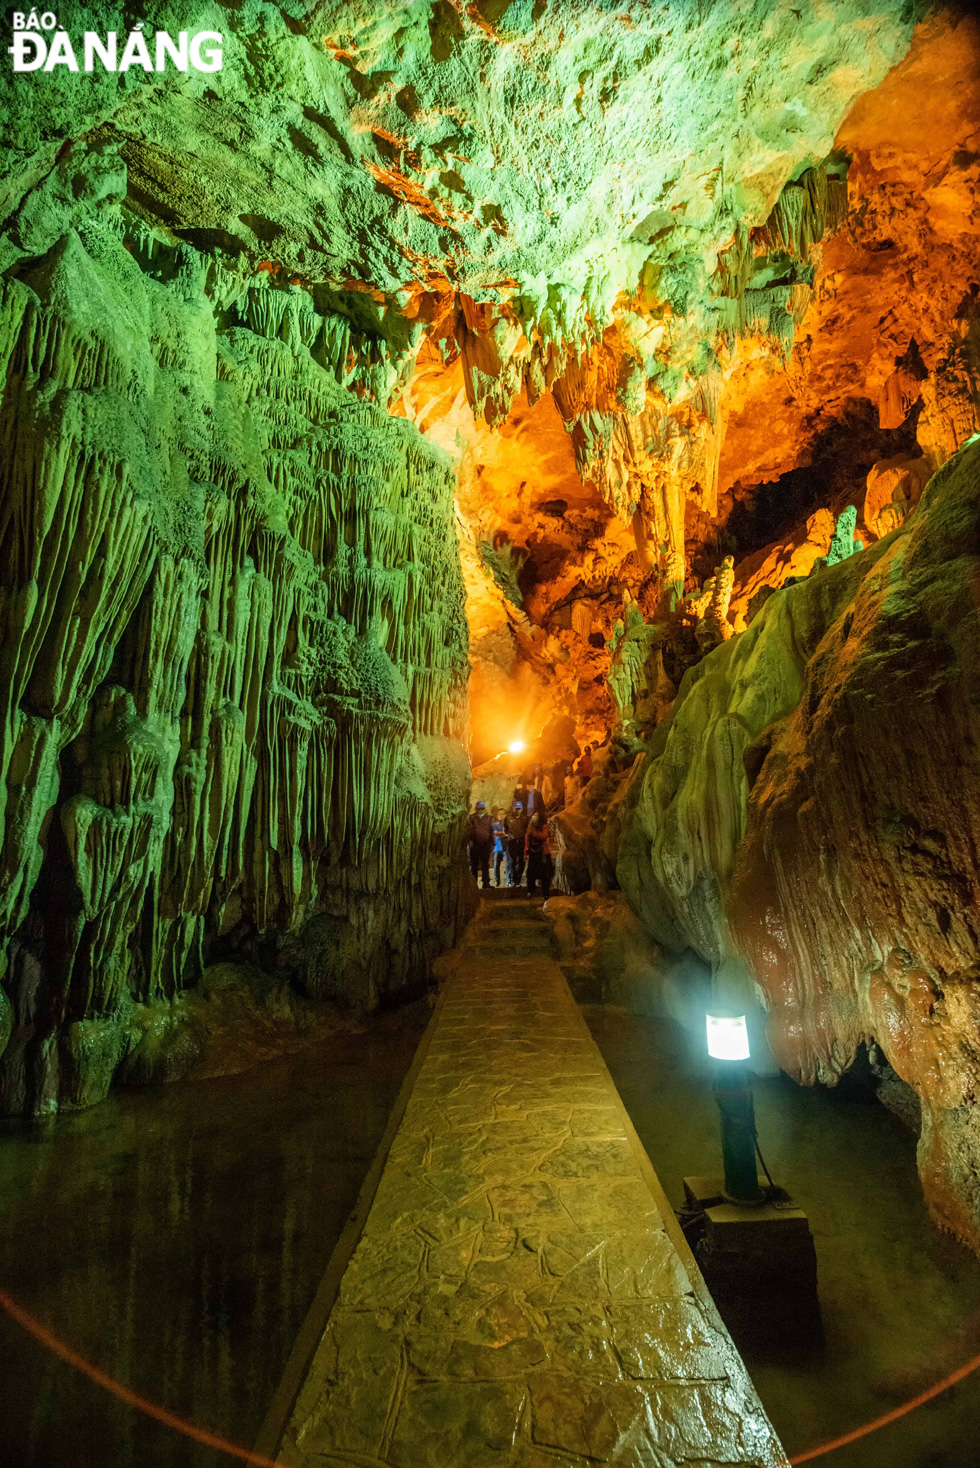  Having attracted a large number of tourists since the late 1990s, the Nguom Ngao Cave is more than 2,000 metres long and has three entrances, namely Nguom Ngao, Nguom Lom, and Ban Thuon.